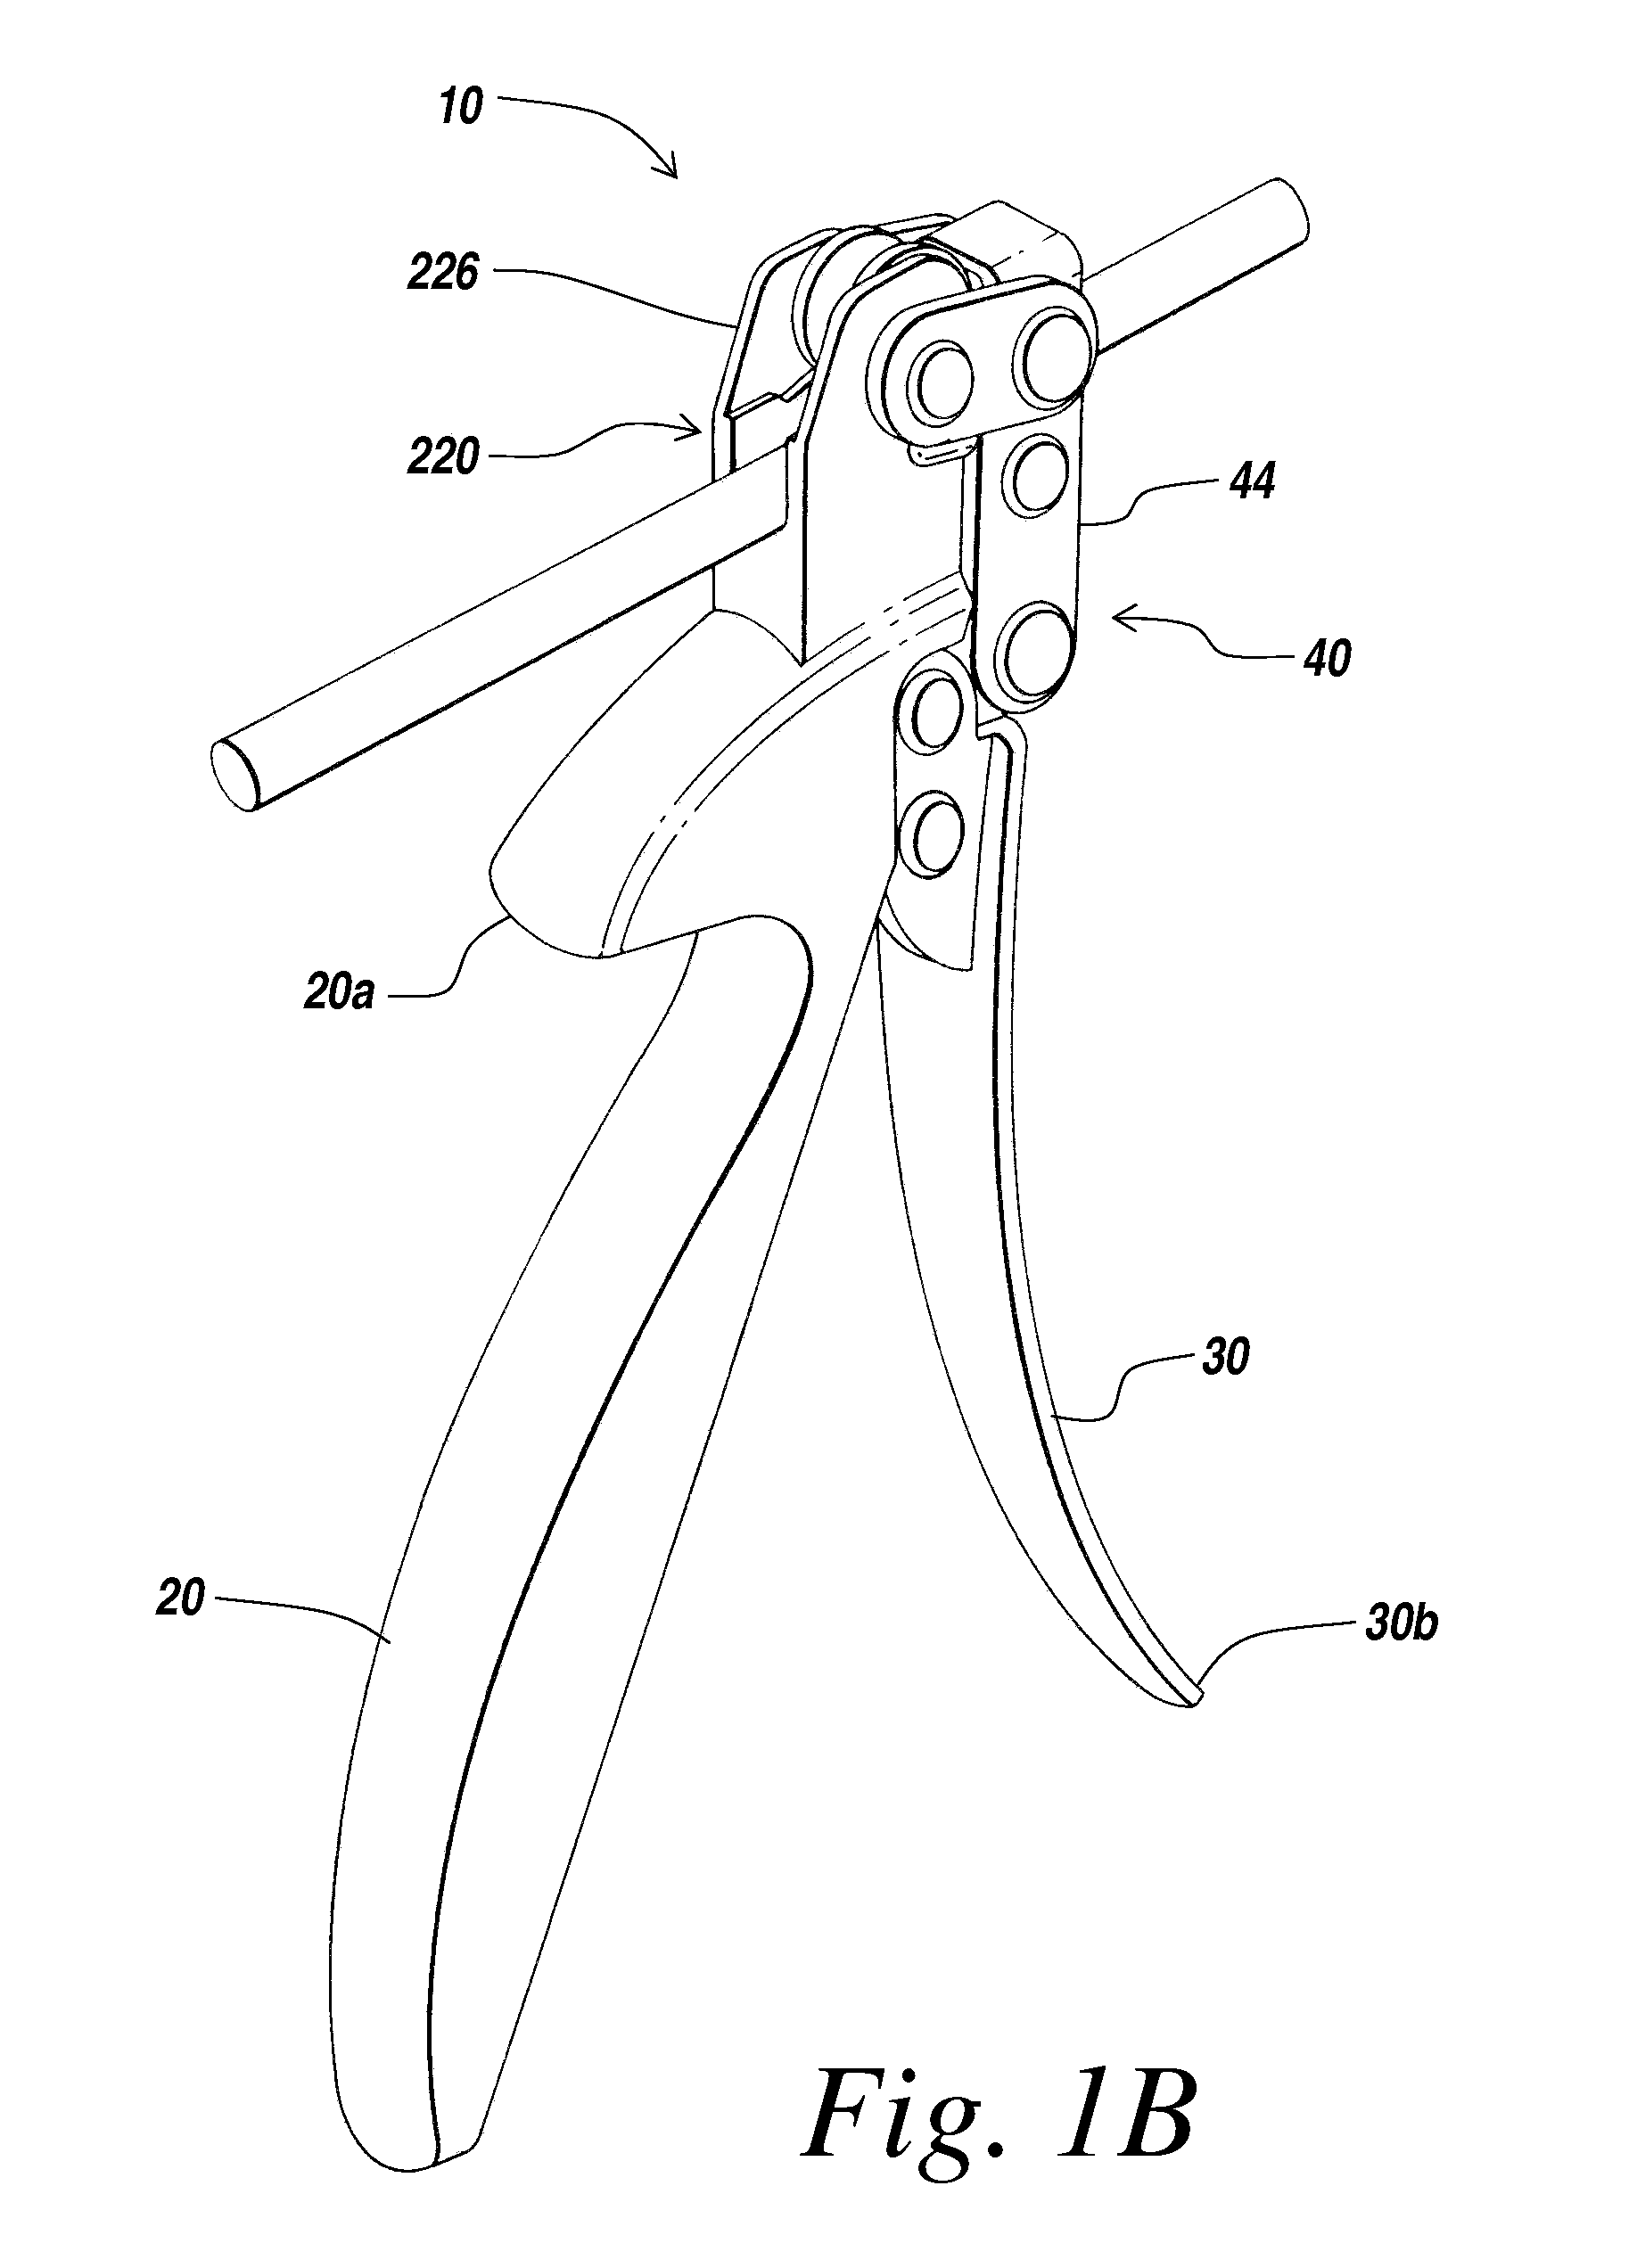 Instrument for bending spinal rods used in a spinal fixation system